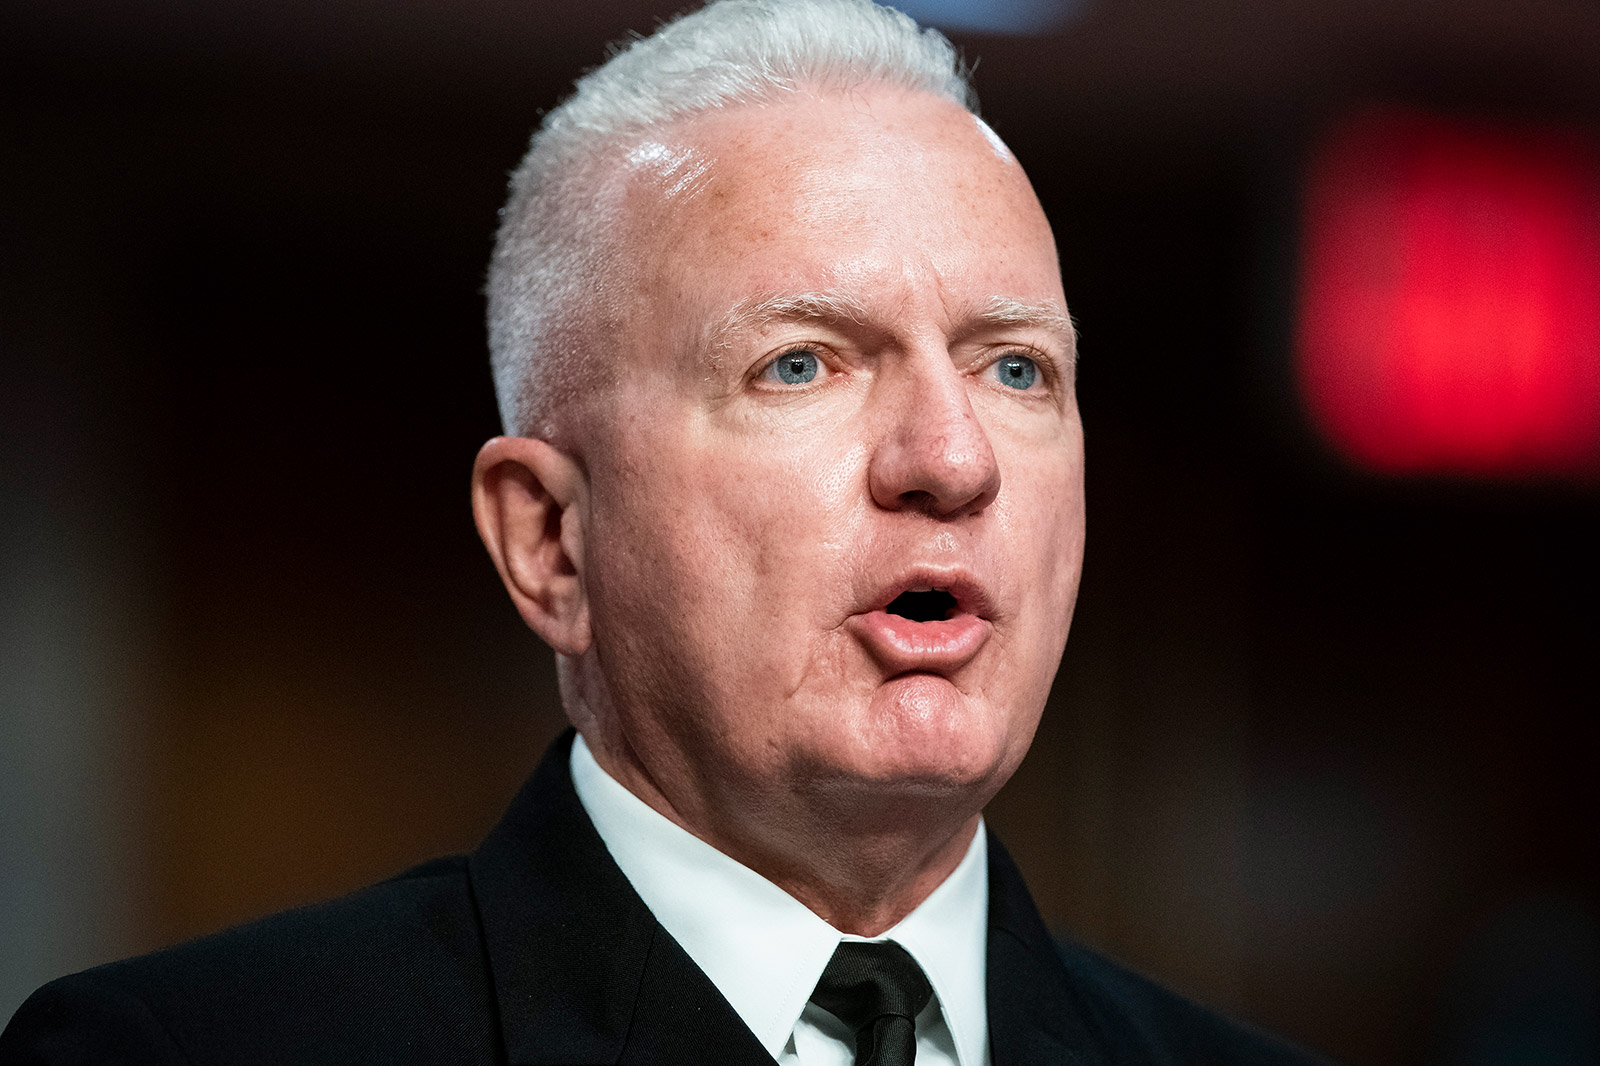 Adm. Brett Giroir speaks during a Senate Health, Education, Labor and Pensions Committee hearing in Washington, DC, on June 30.